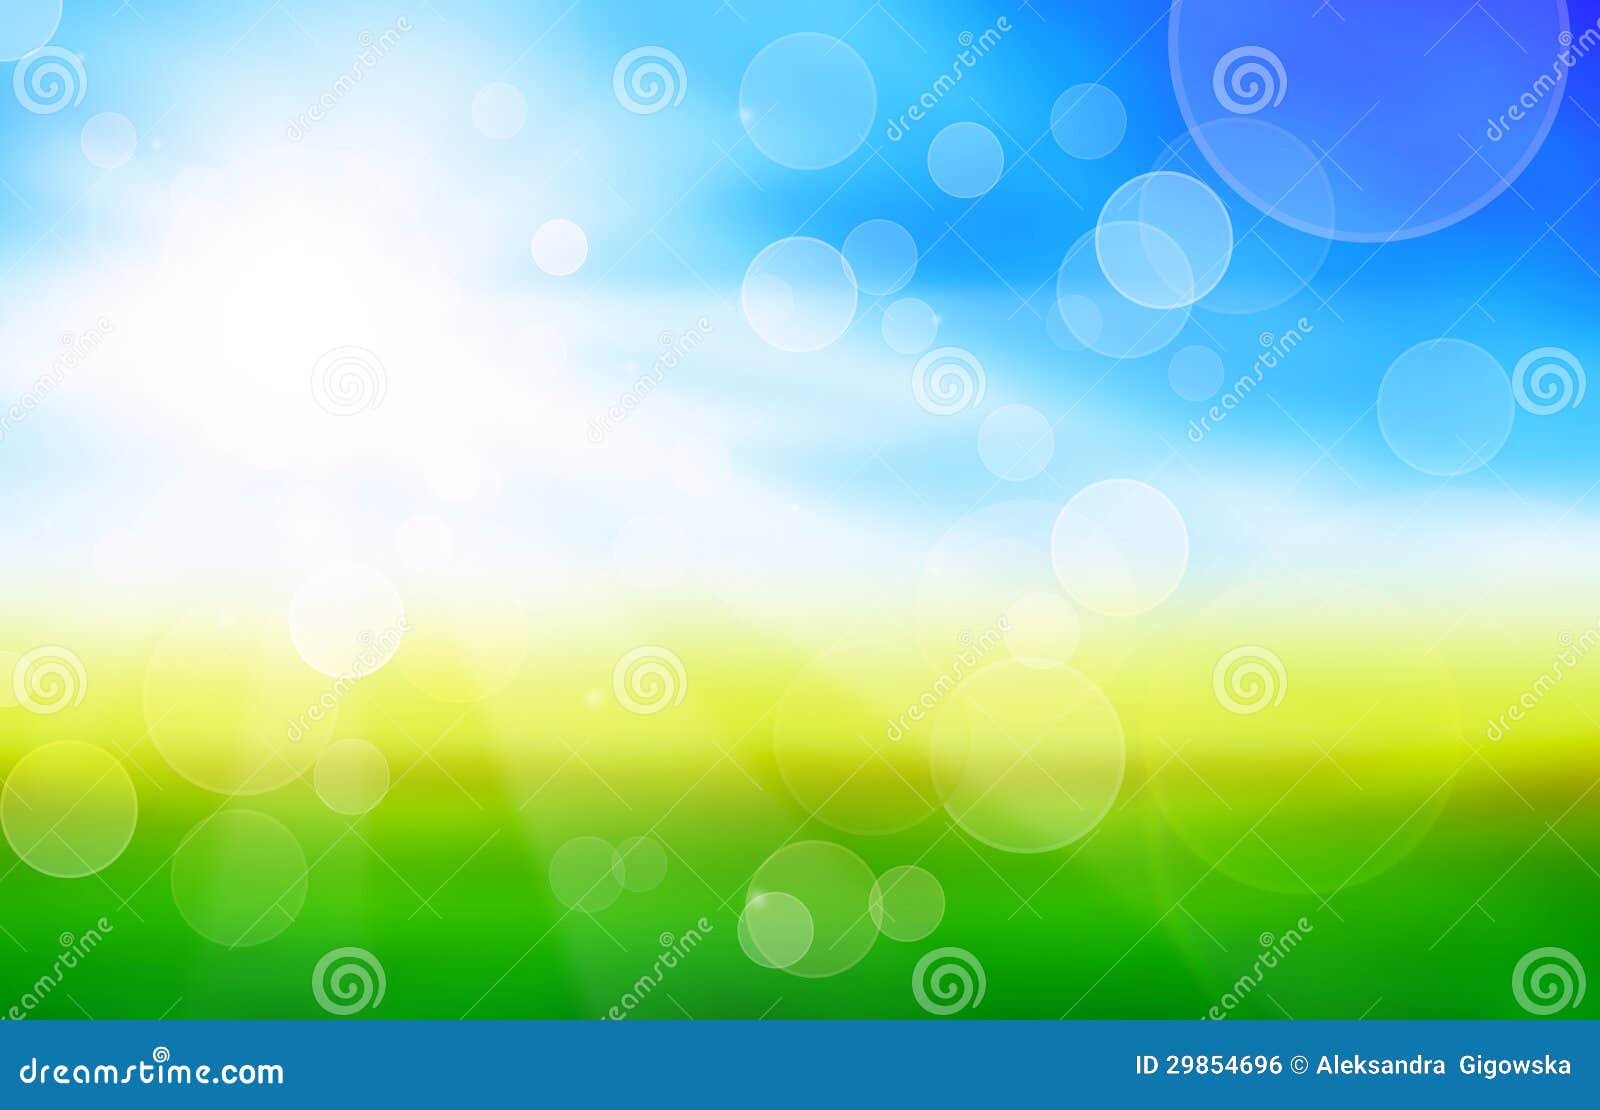 sunshine spring background with green fields